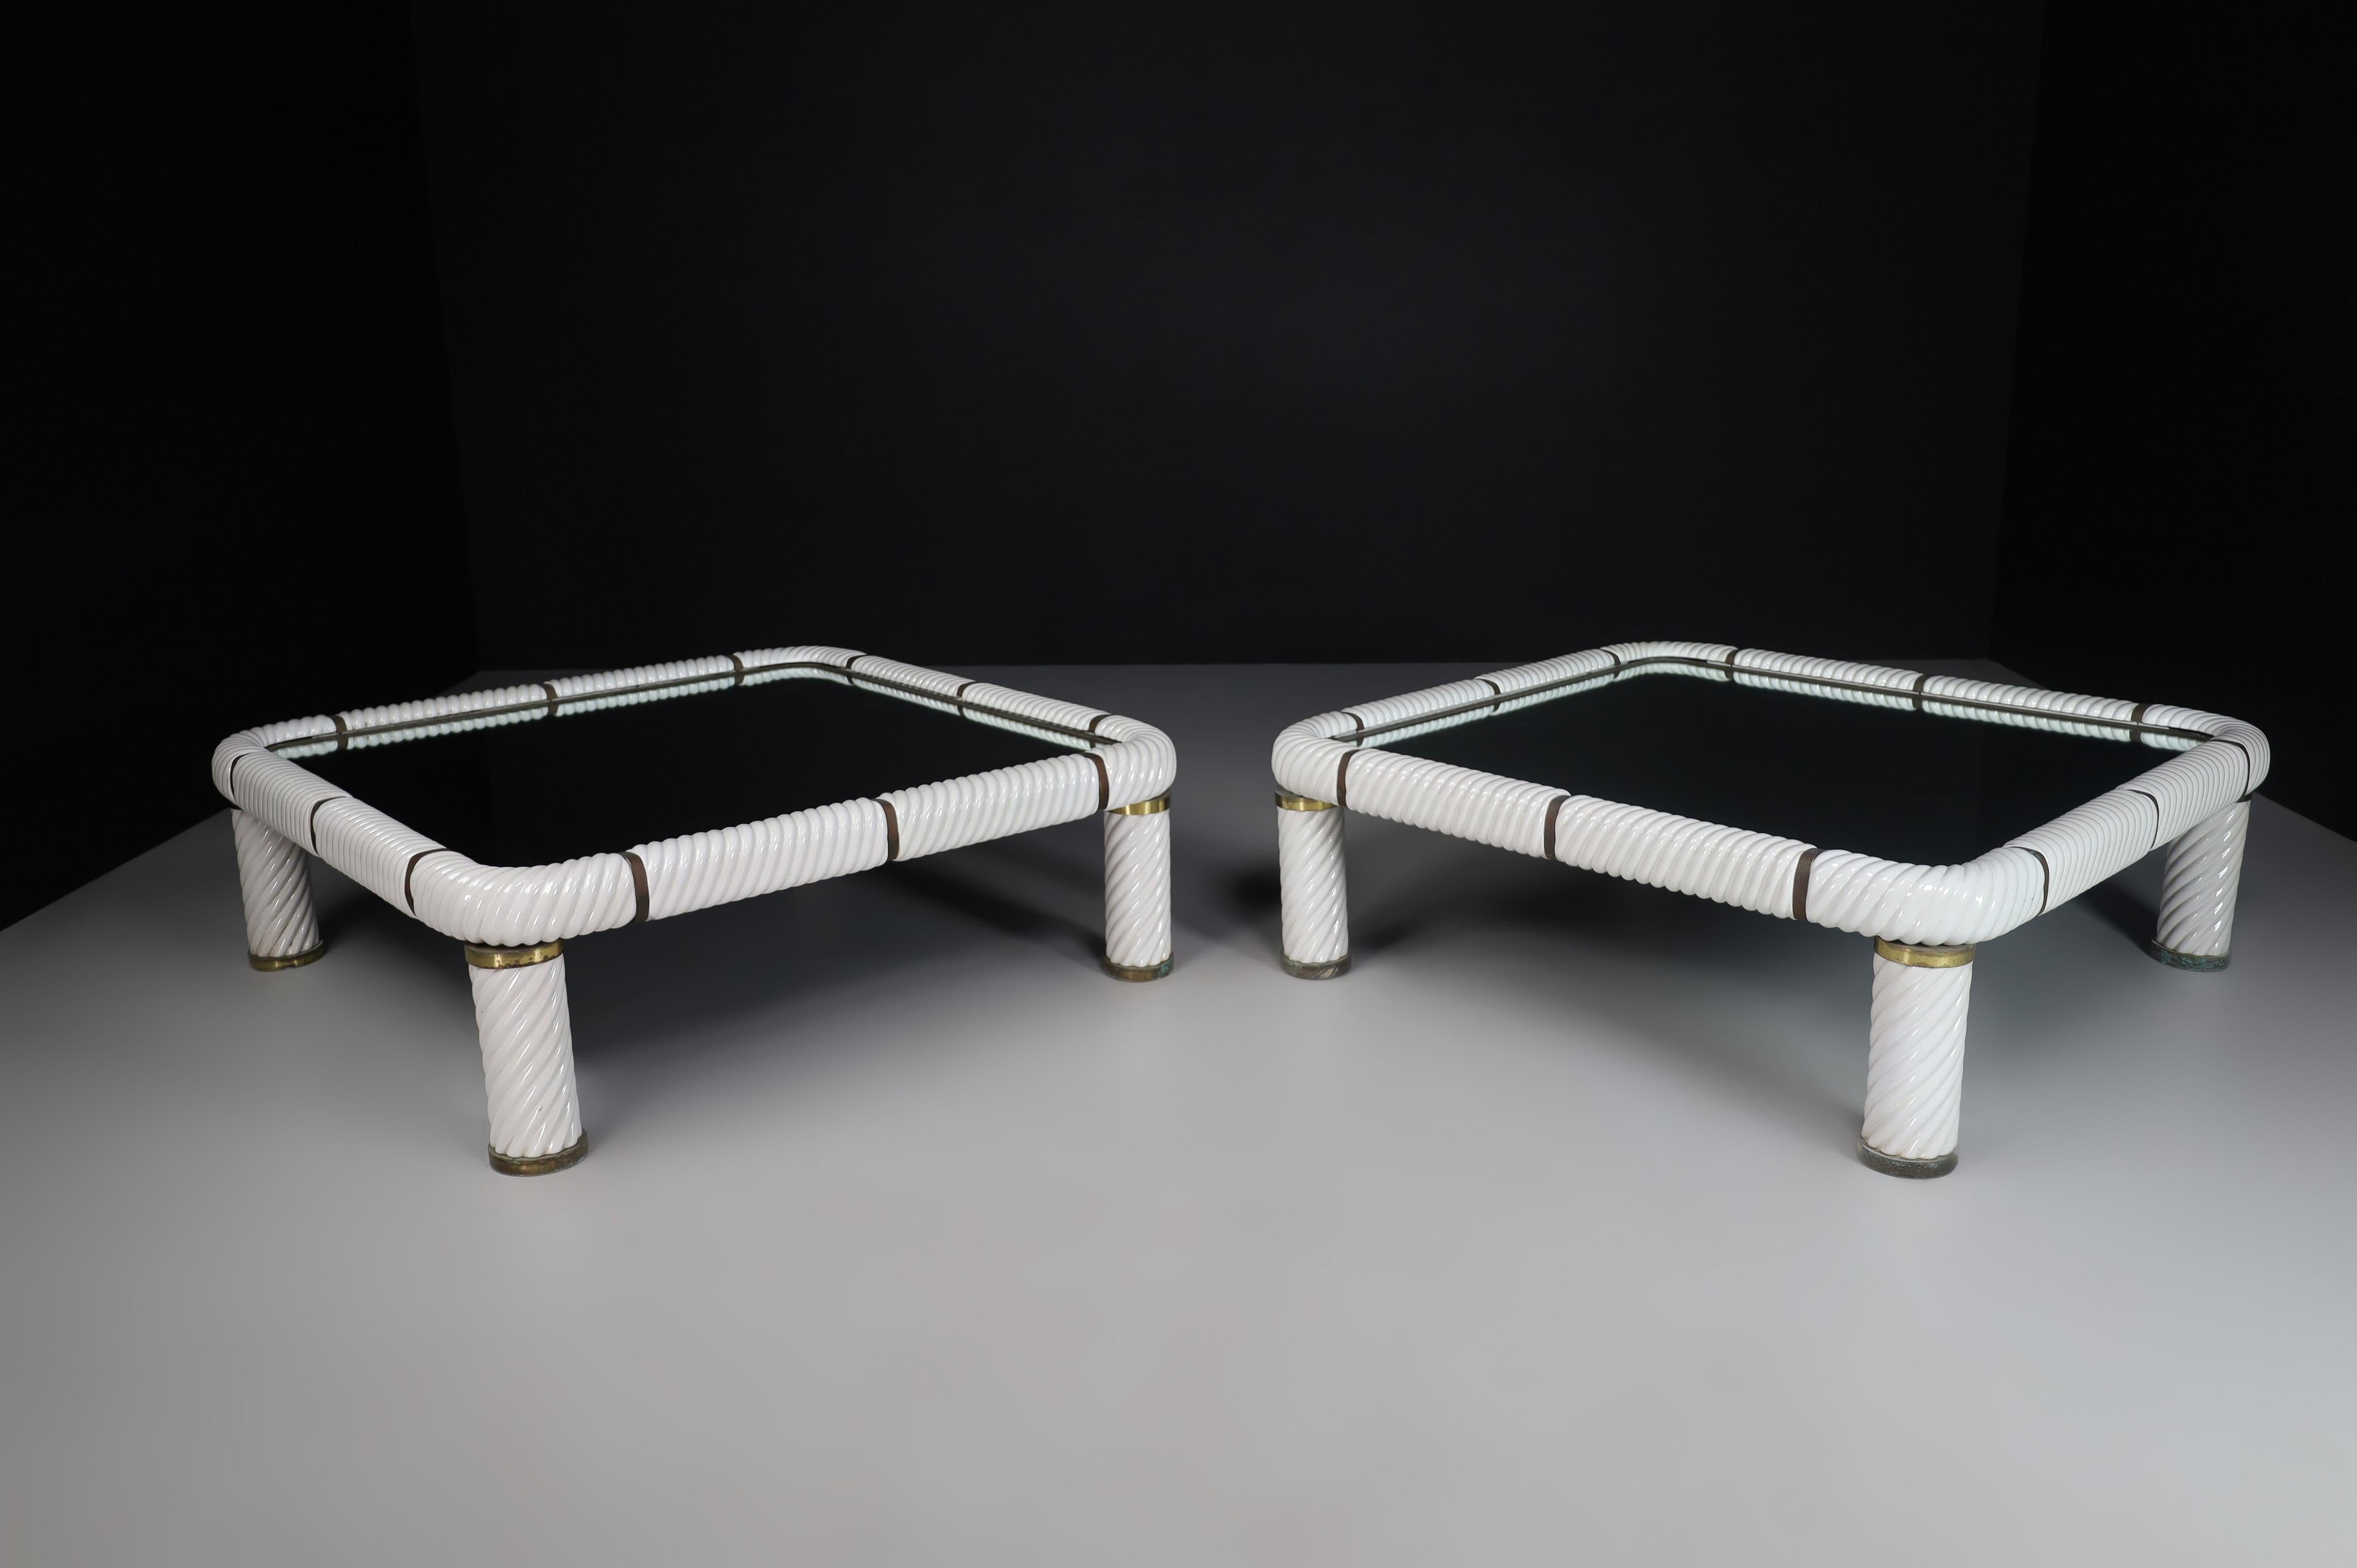 Stunning pair of two large Tommaso barbi white ceramic and brass coffee tables made and designed in Italy 1970s .These tables features one of Barbi's signature techniques, which is porcelain in a spiral form to give this table it's absolute stunning